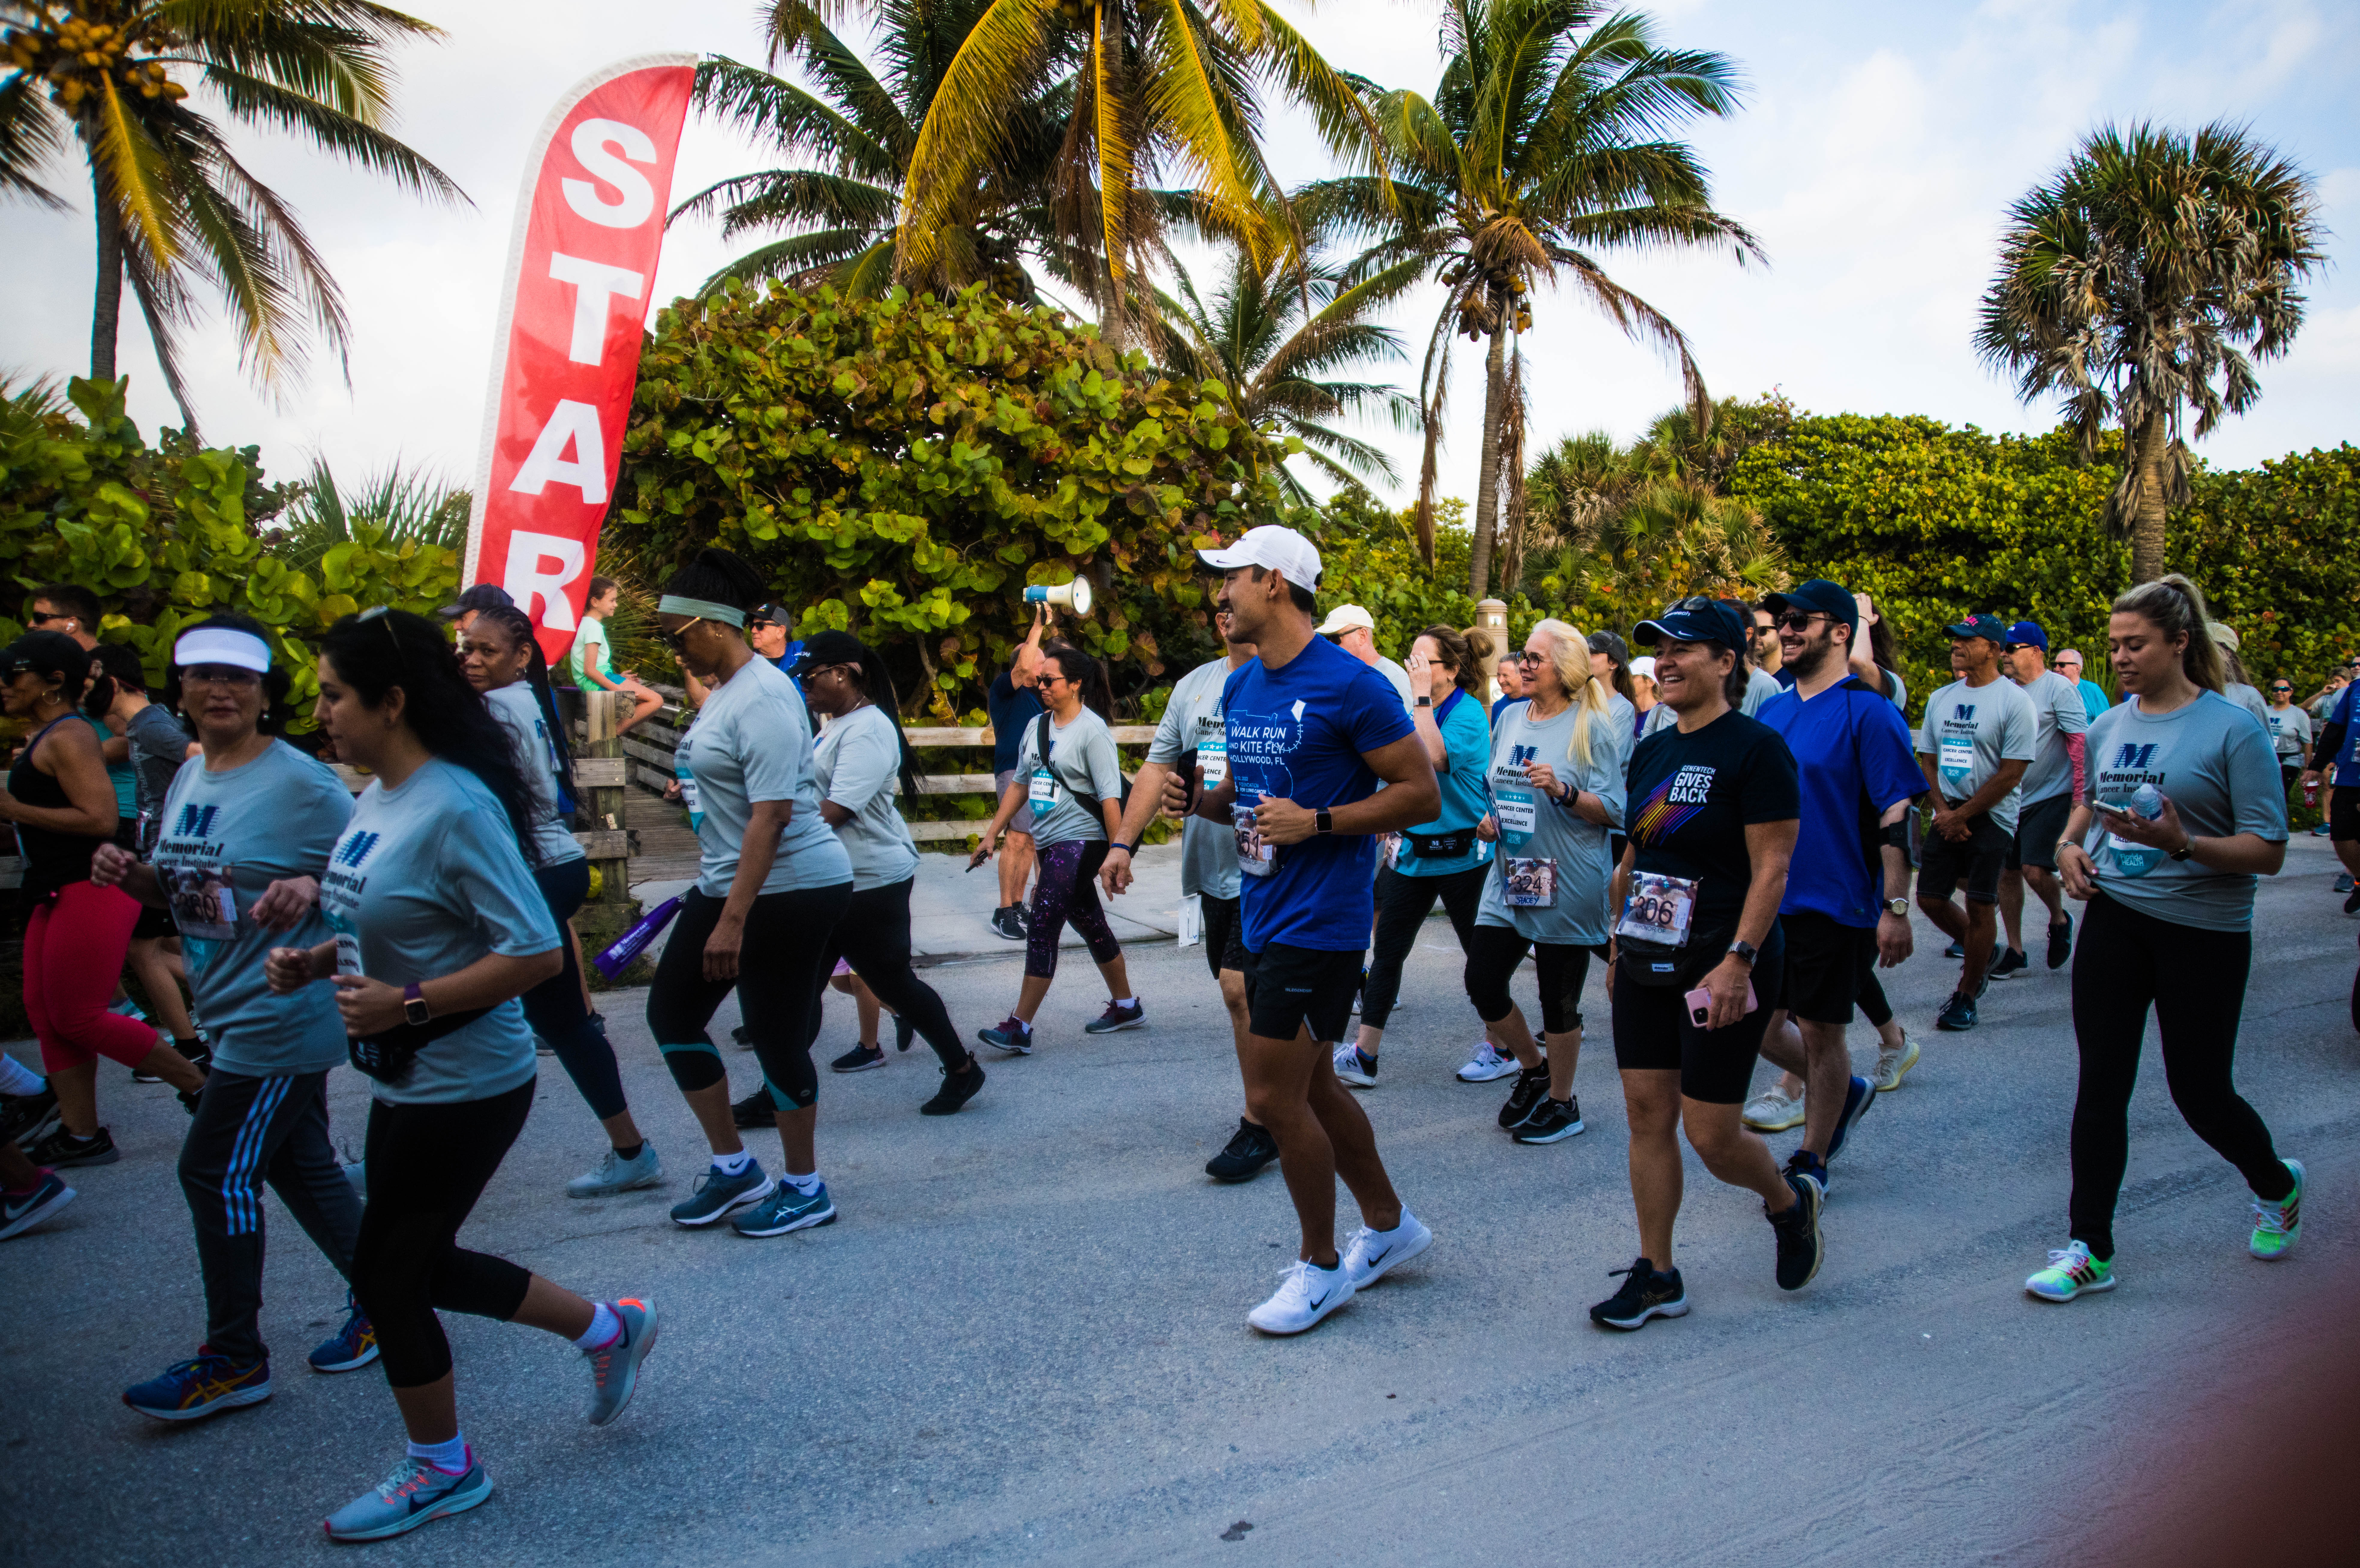 Runners at Hollywood FL event